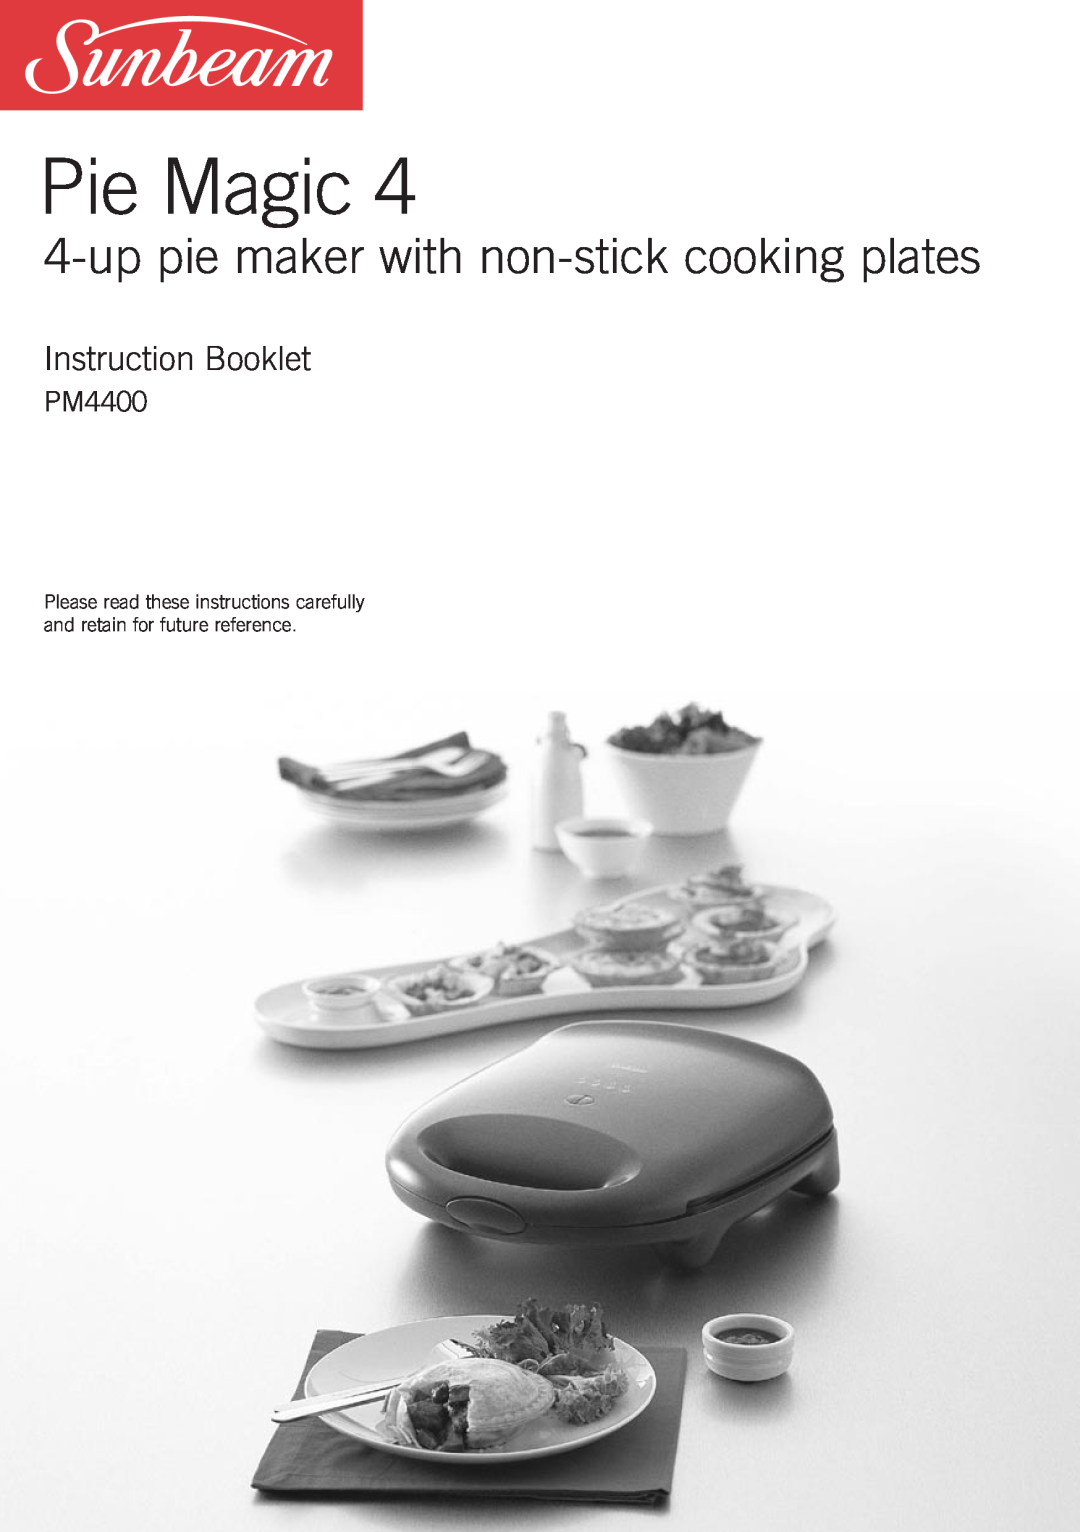 Sunbeam Pie Magic 4 manual uppie maker with non-stickcooking plates, Instruction Booklet, PM4400 